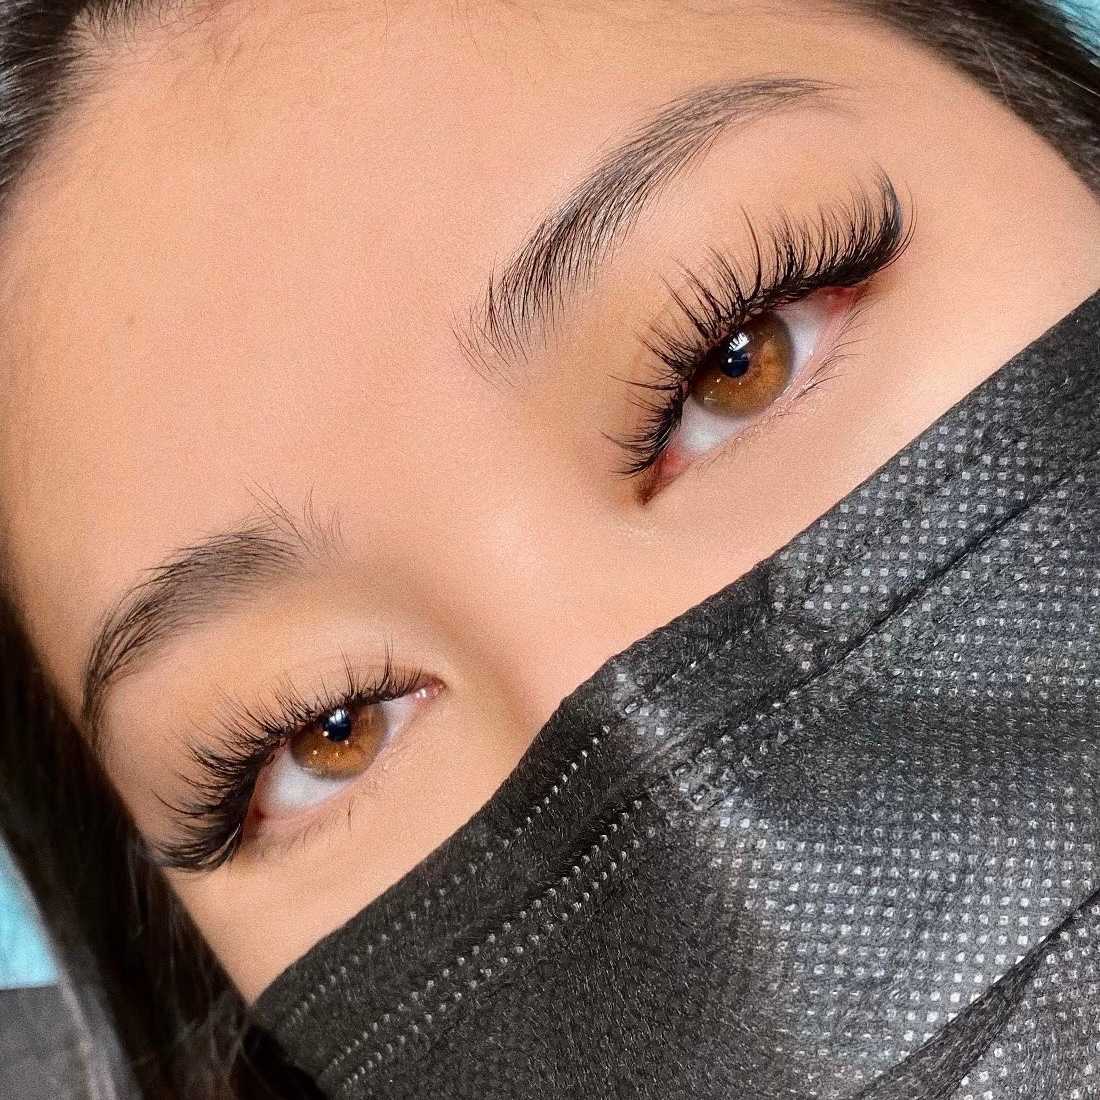 Beauty begins the moment you decide to get your lashes done!” Her eye shape  is unique and so pretty, customized a anime set just for her… | Instagram